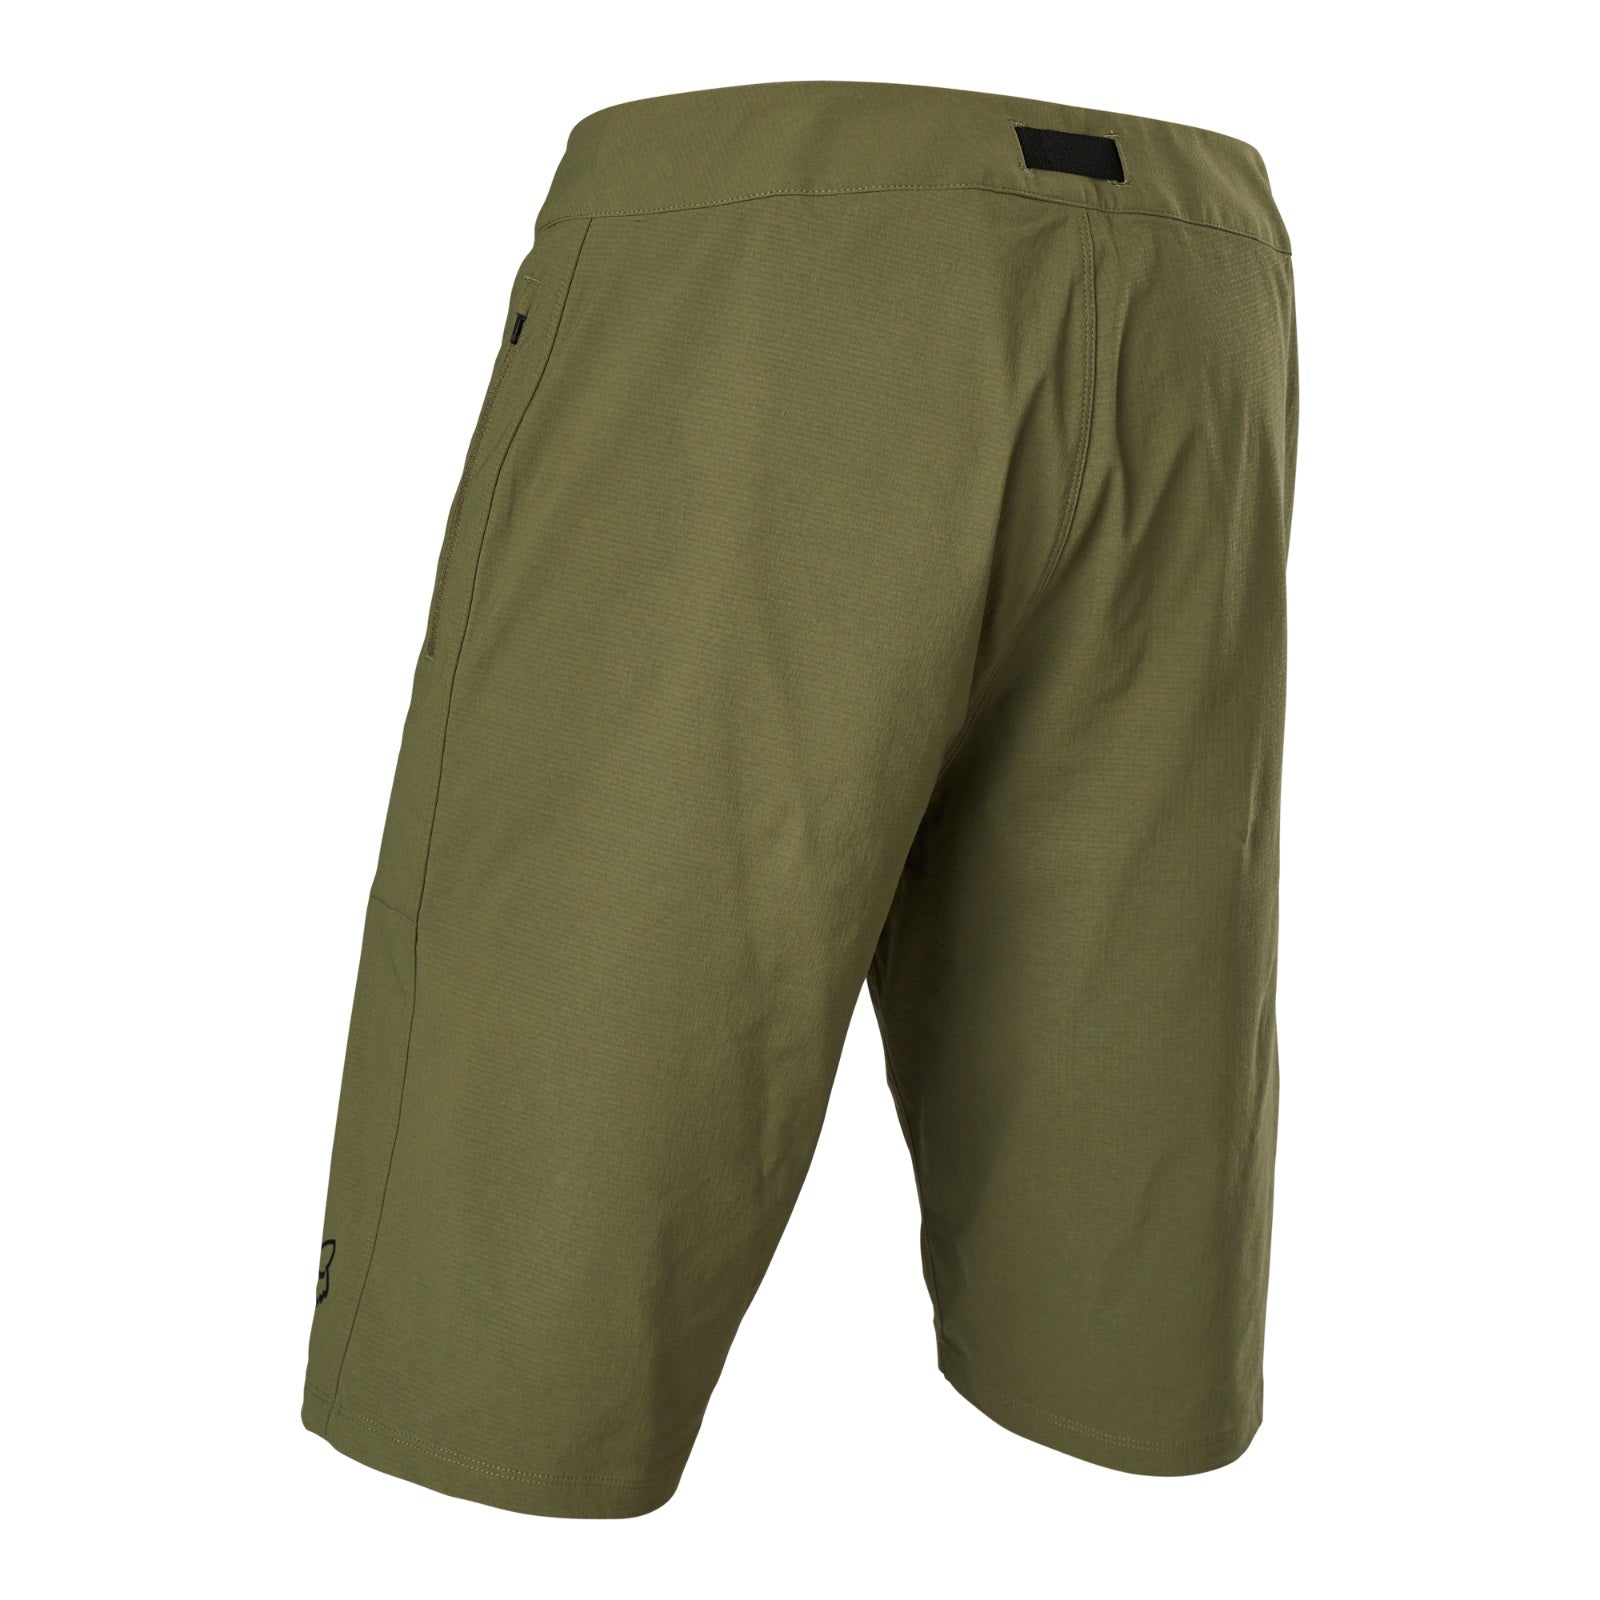 Fox Short Ranger, With Liner, Size 32,  Olive Green 